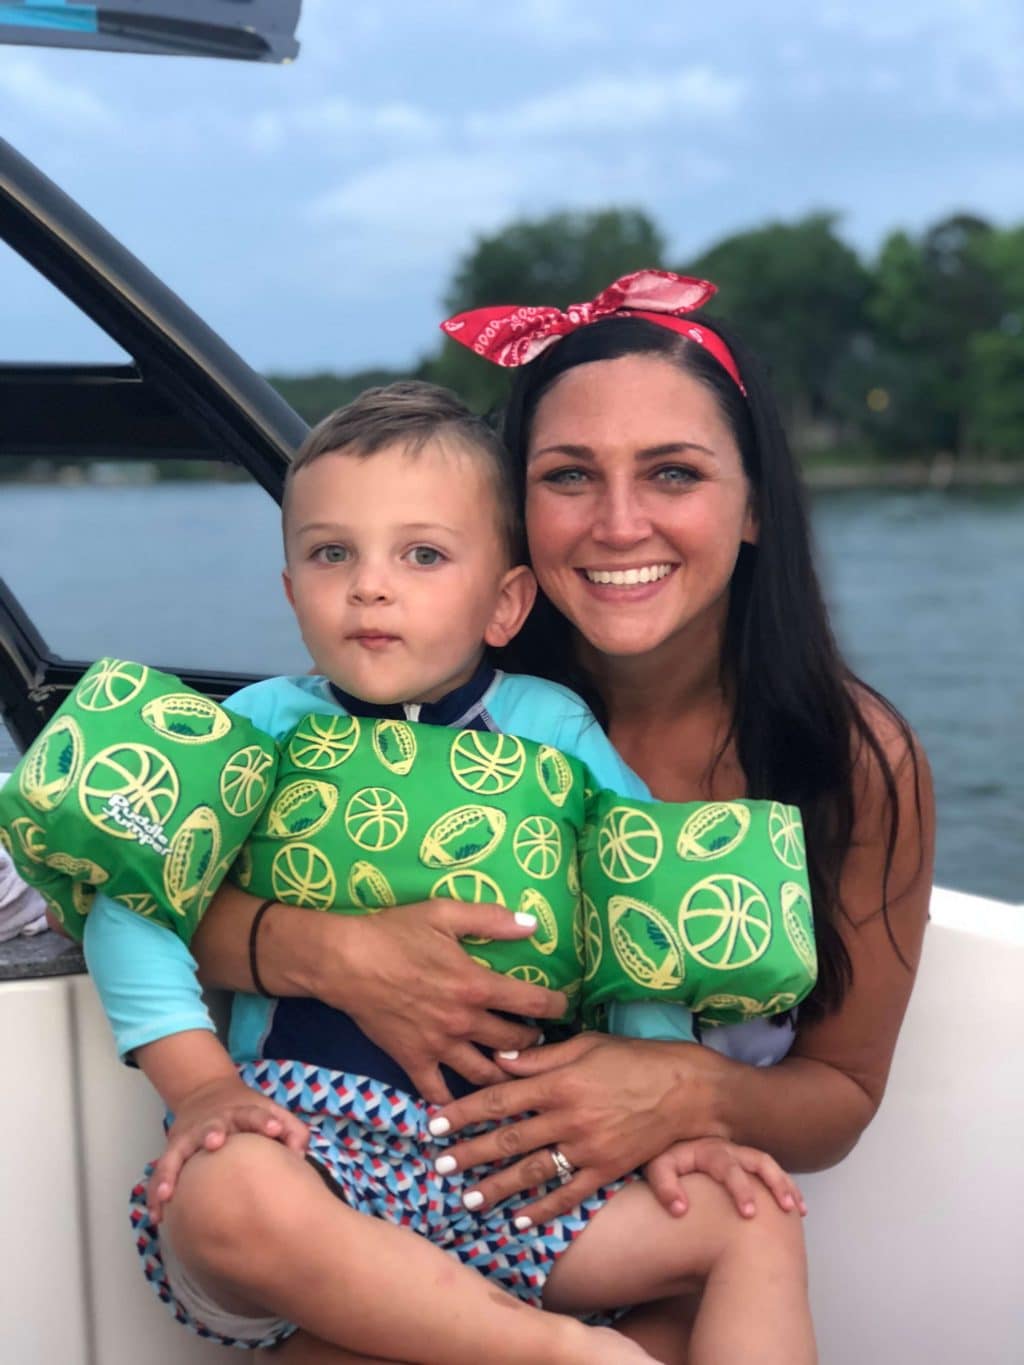 Lake Norman, Sisters, Boat Day, Stilettos and Diapers, Molly Wey